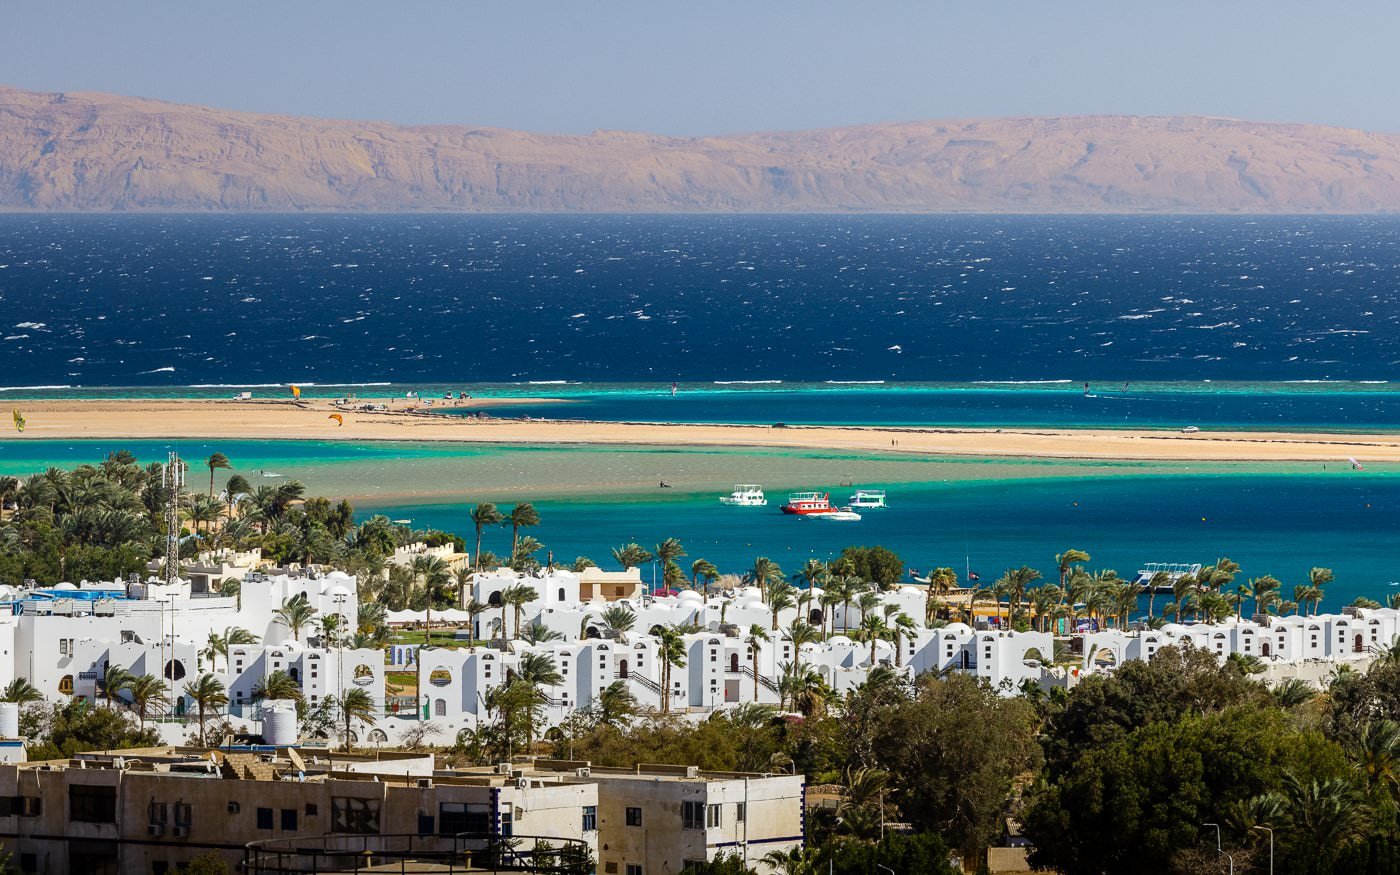 Resort town of Dahab in the Egypt Red Sea